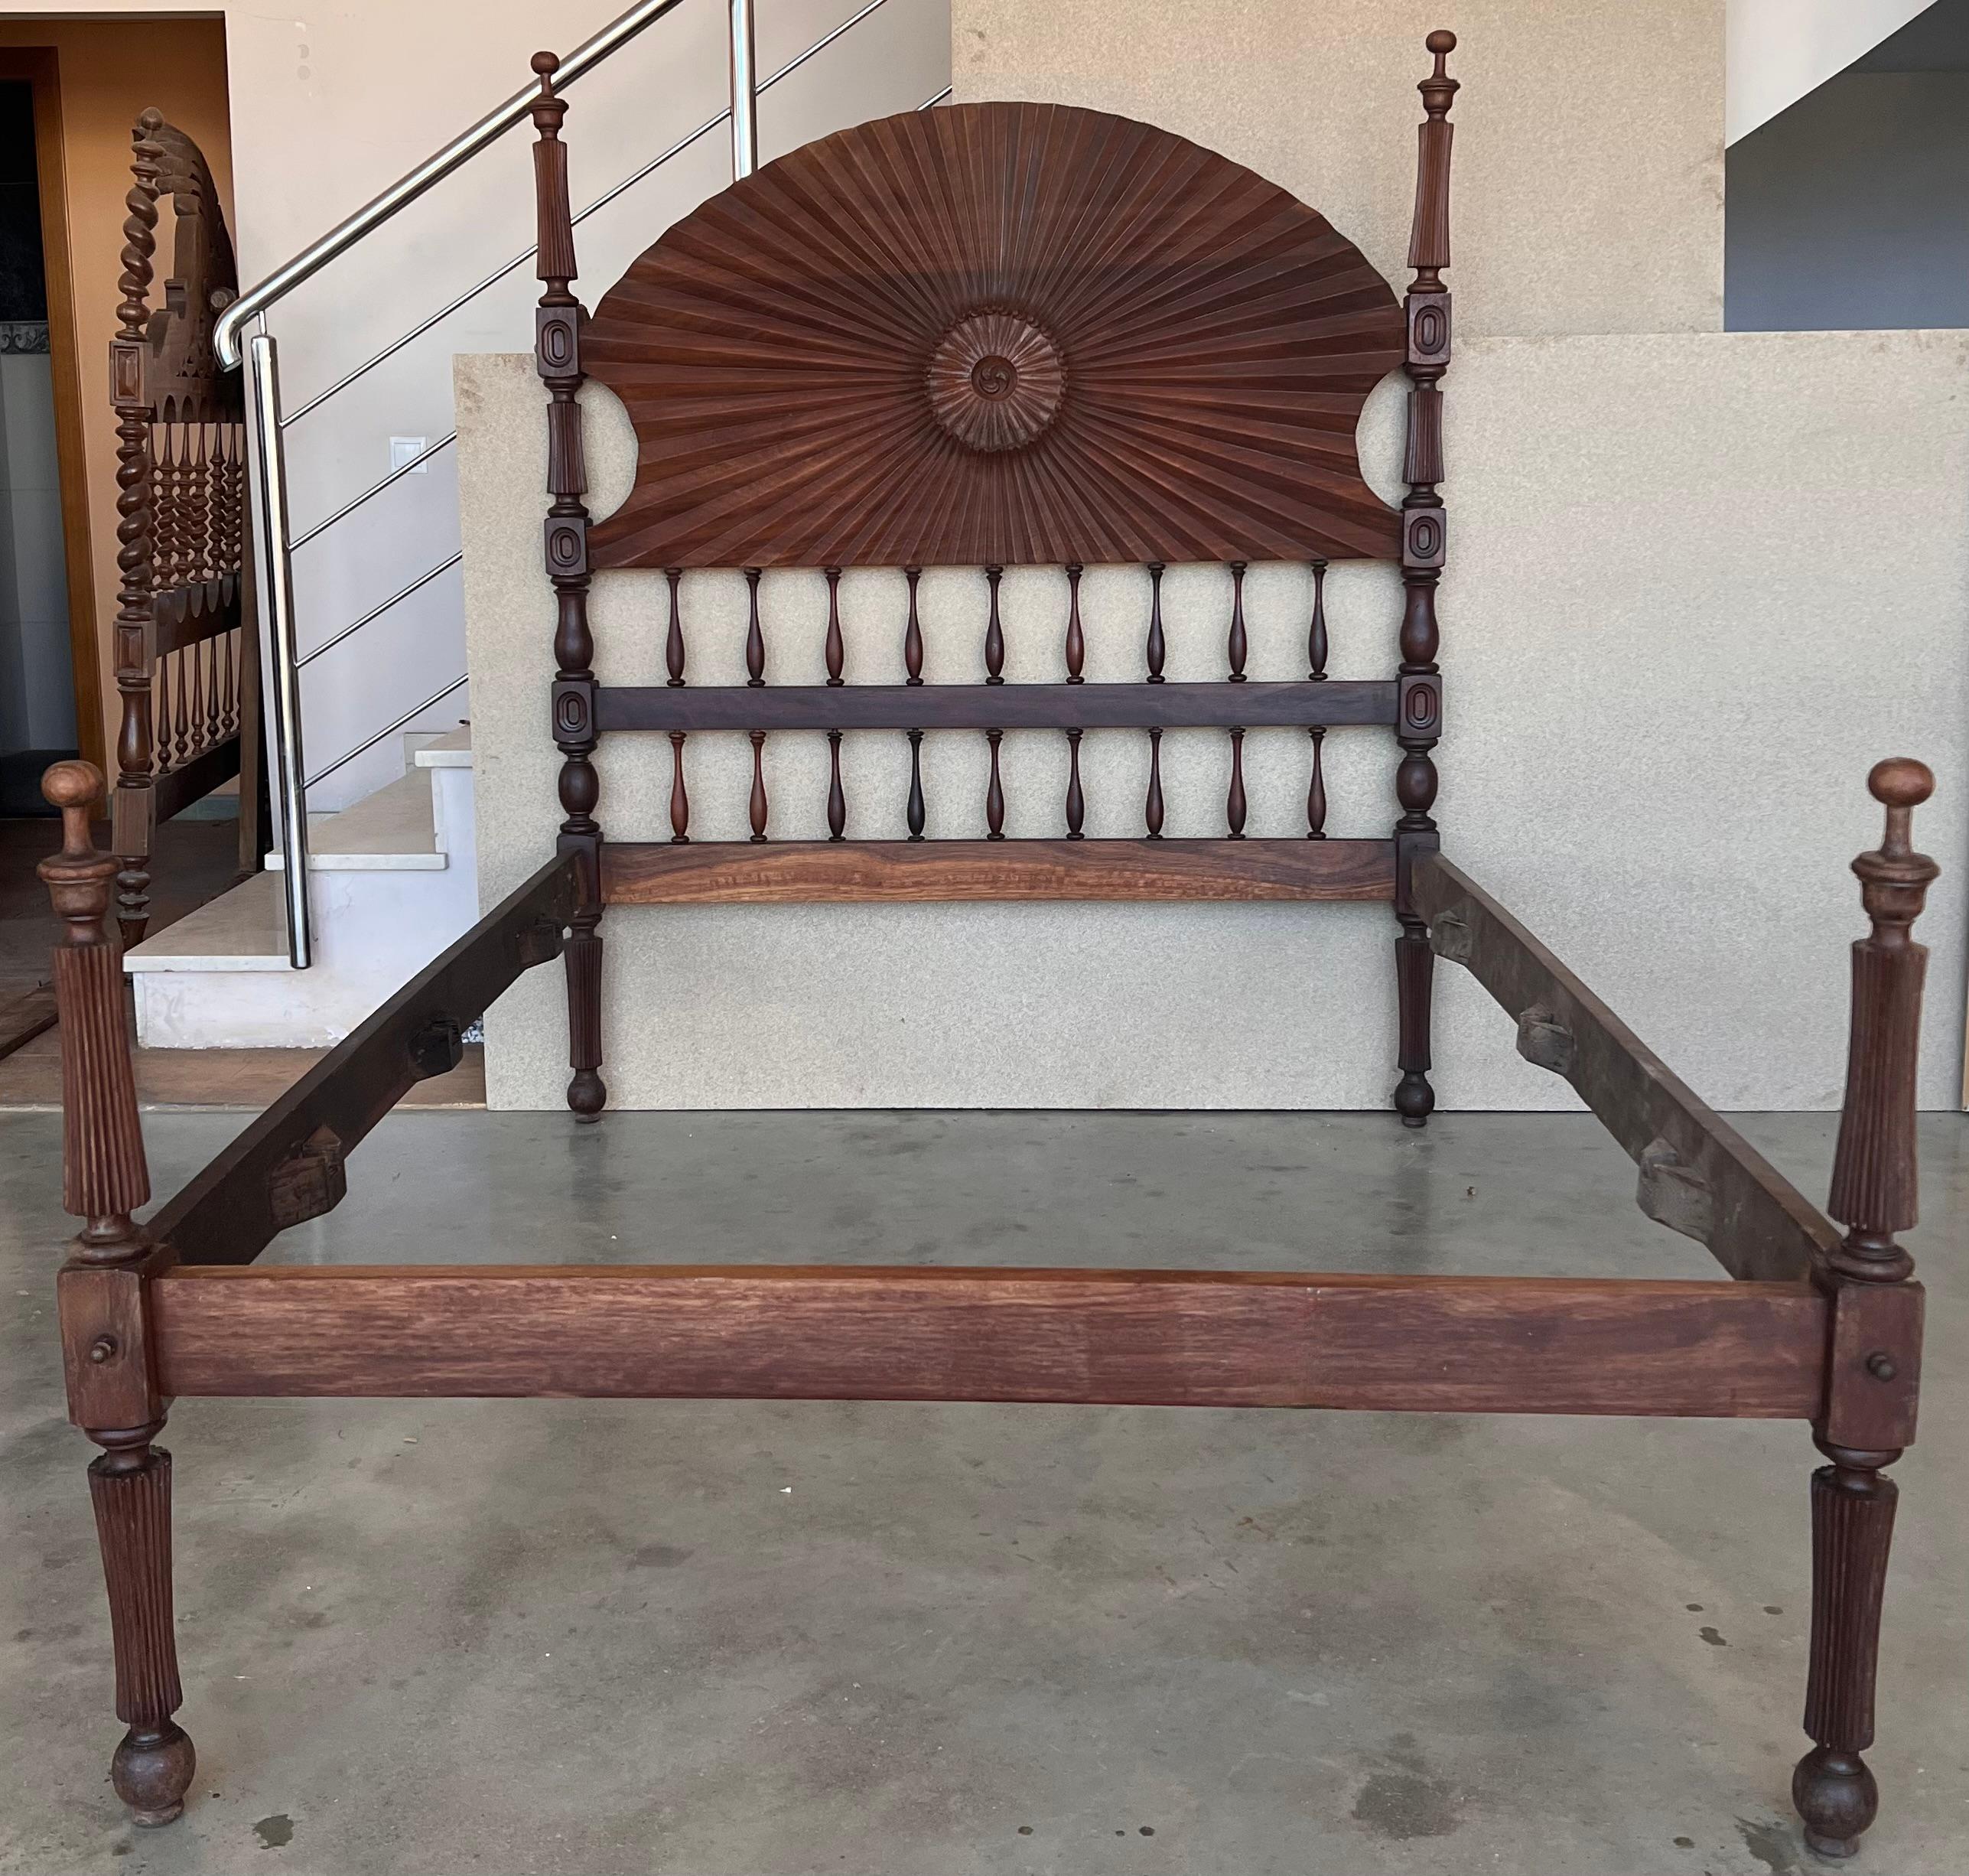 19th Century baroque bed, original Spanish bed.

This queen size 4-poster bed is hand carved with elaborate details, fluted turned post, 3D open spiral twist spindles, and moorish details represented by the repetition of arches. It is carved and